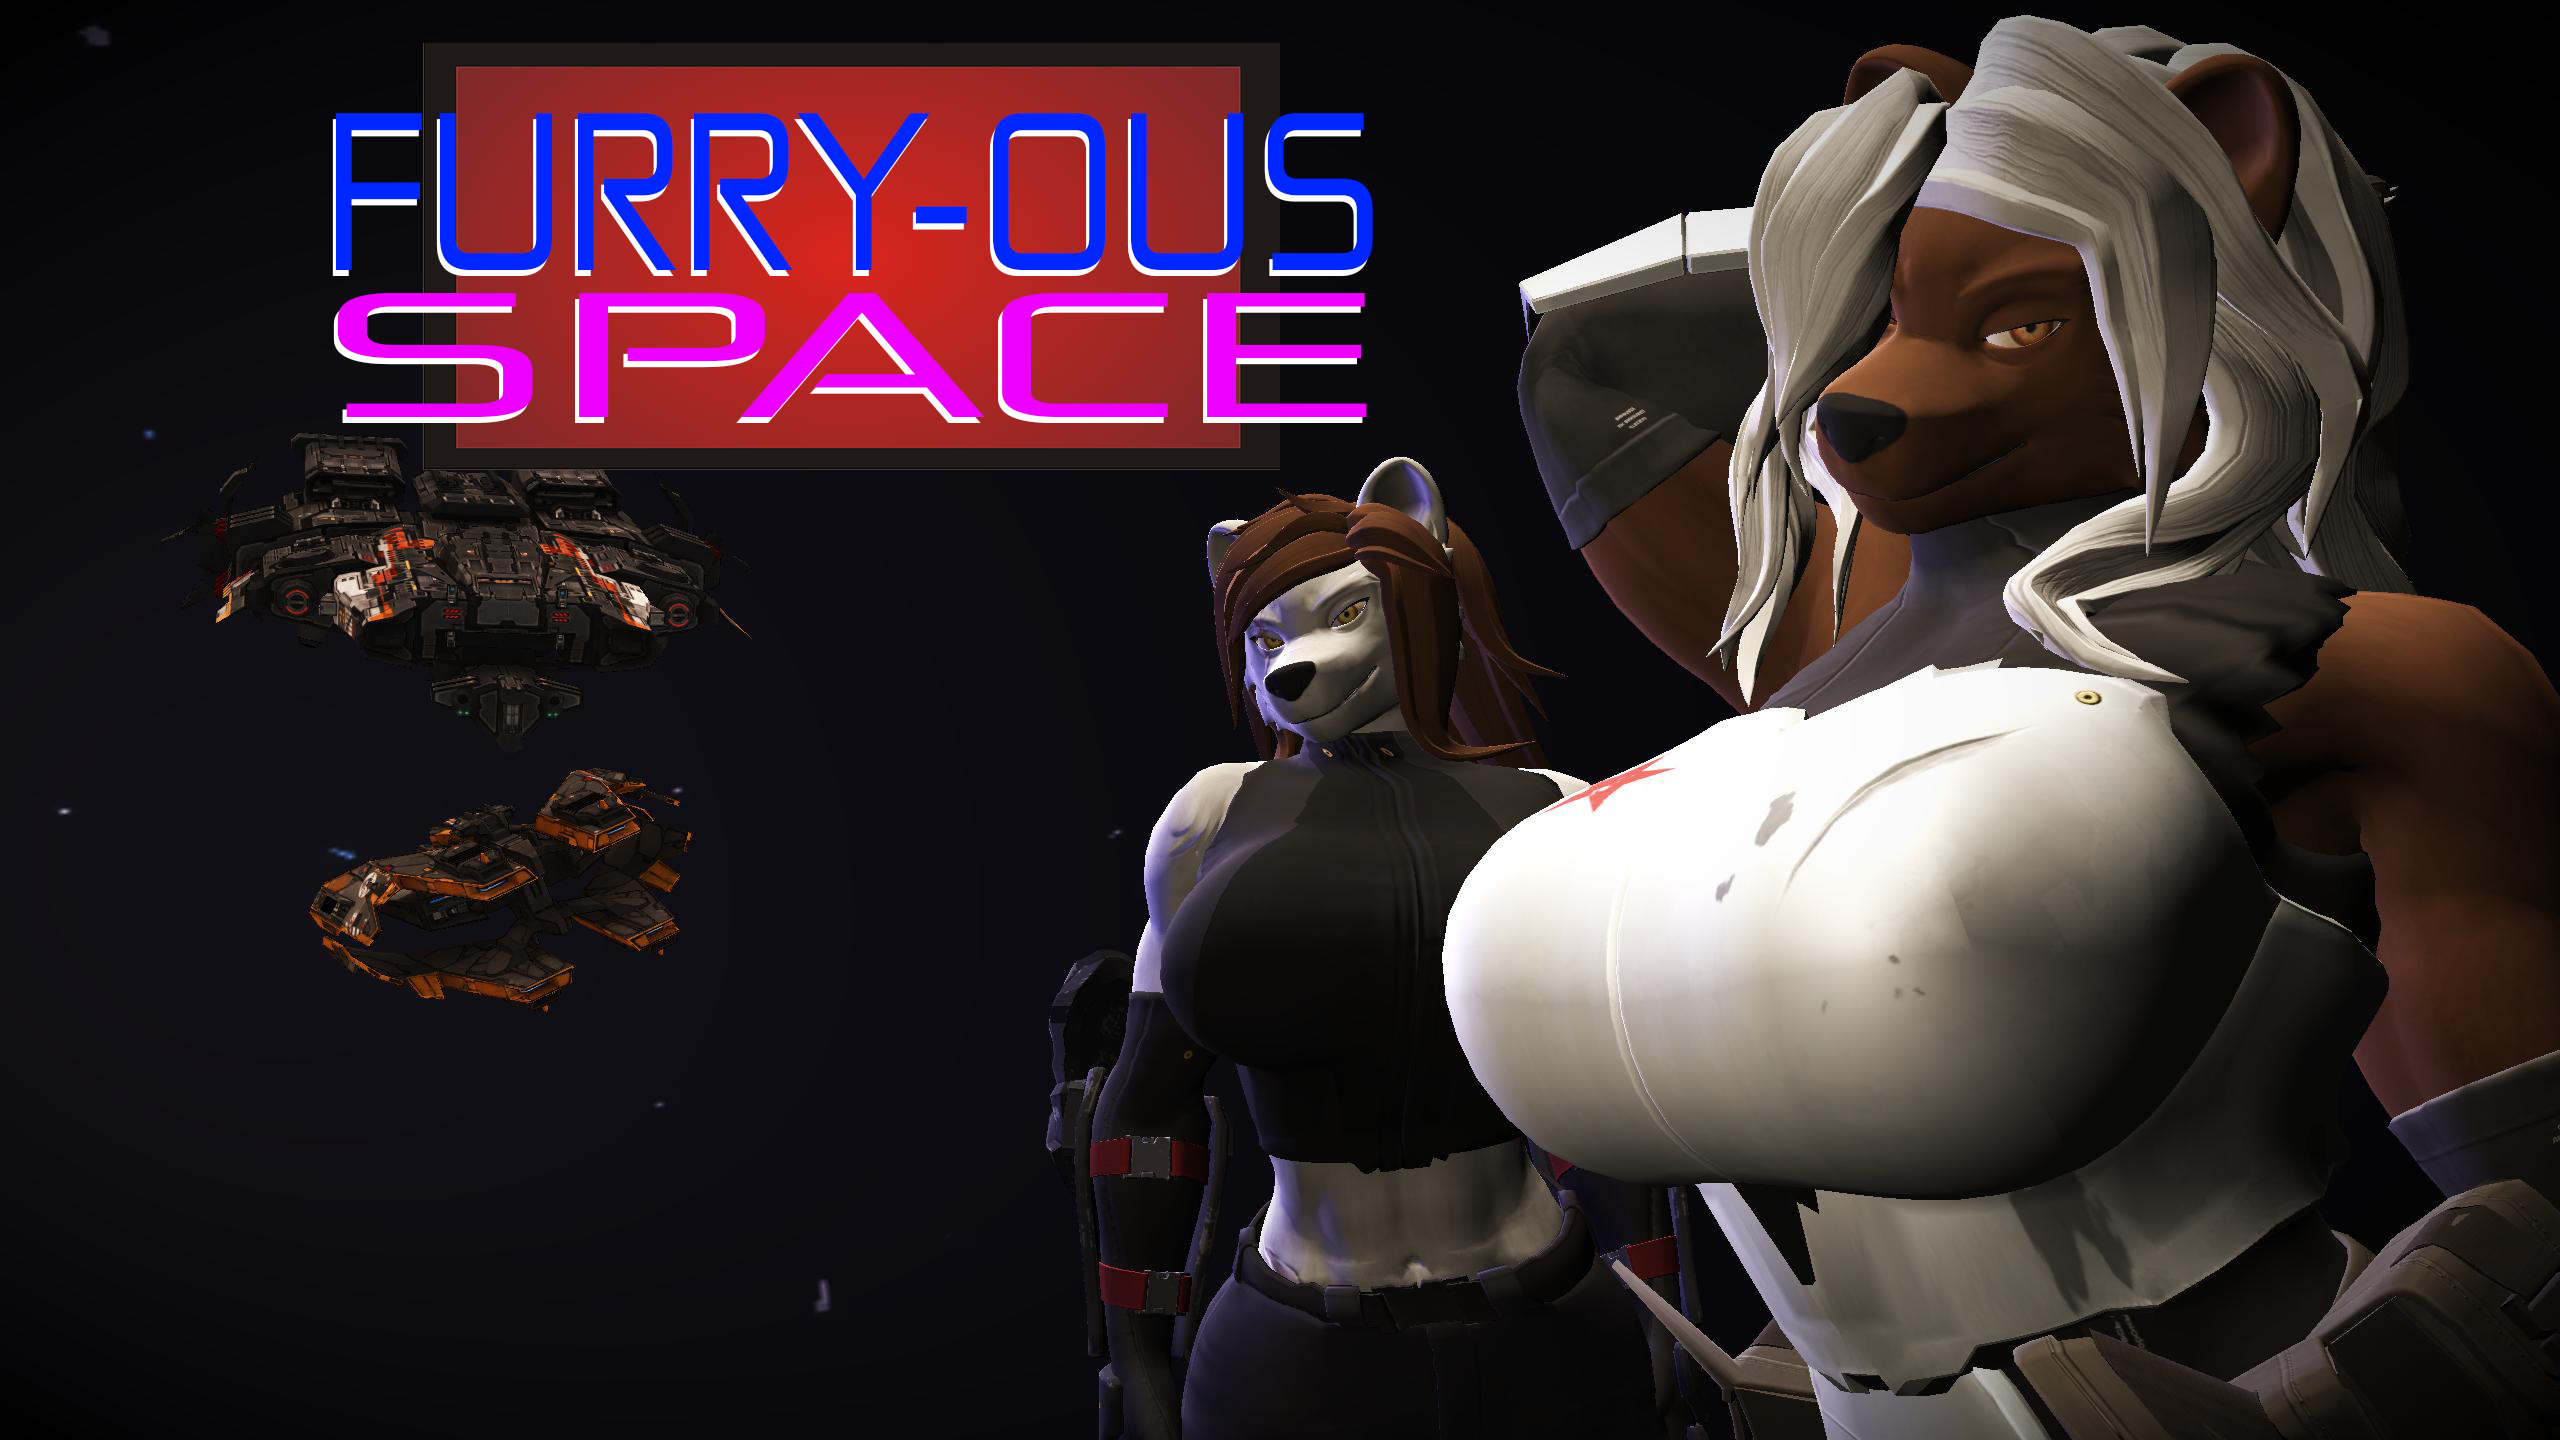 Furry-ous Space Demo for OculusMeta Quest and Rift by Bald Hamster Games